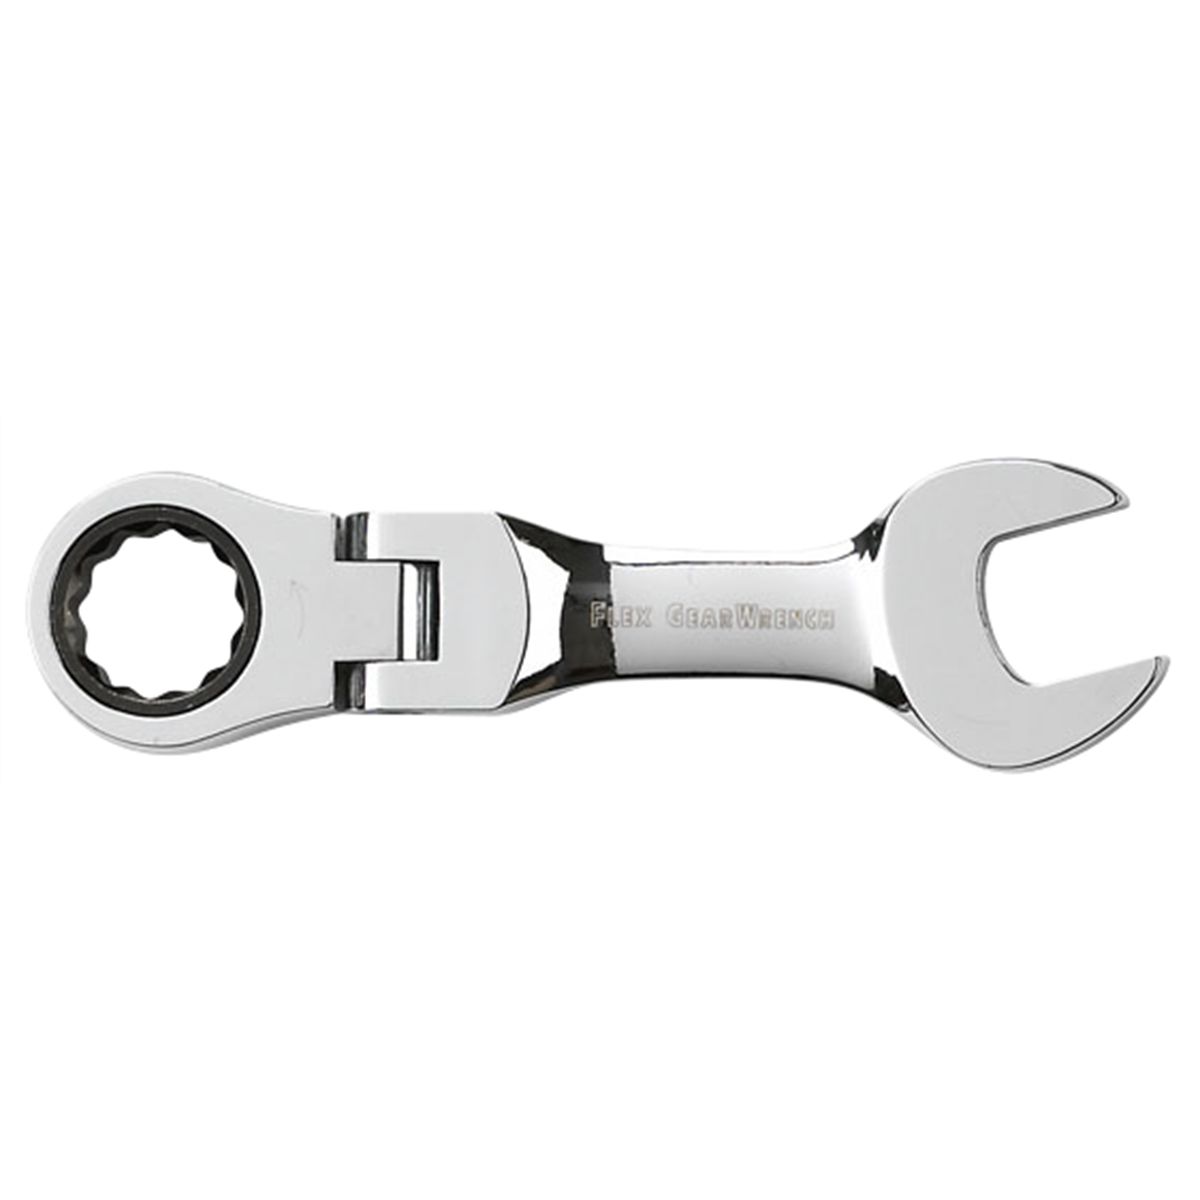 5/8" Stubby Flex Combination Ratcheting Wrench